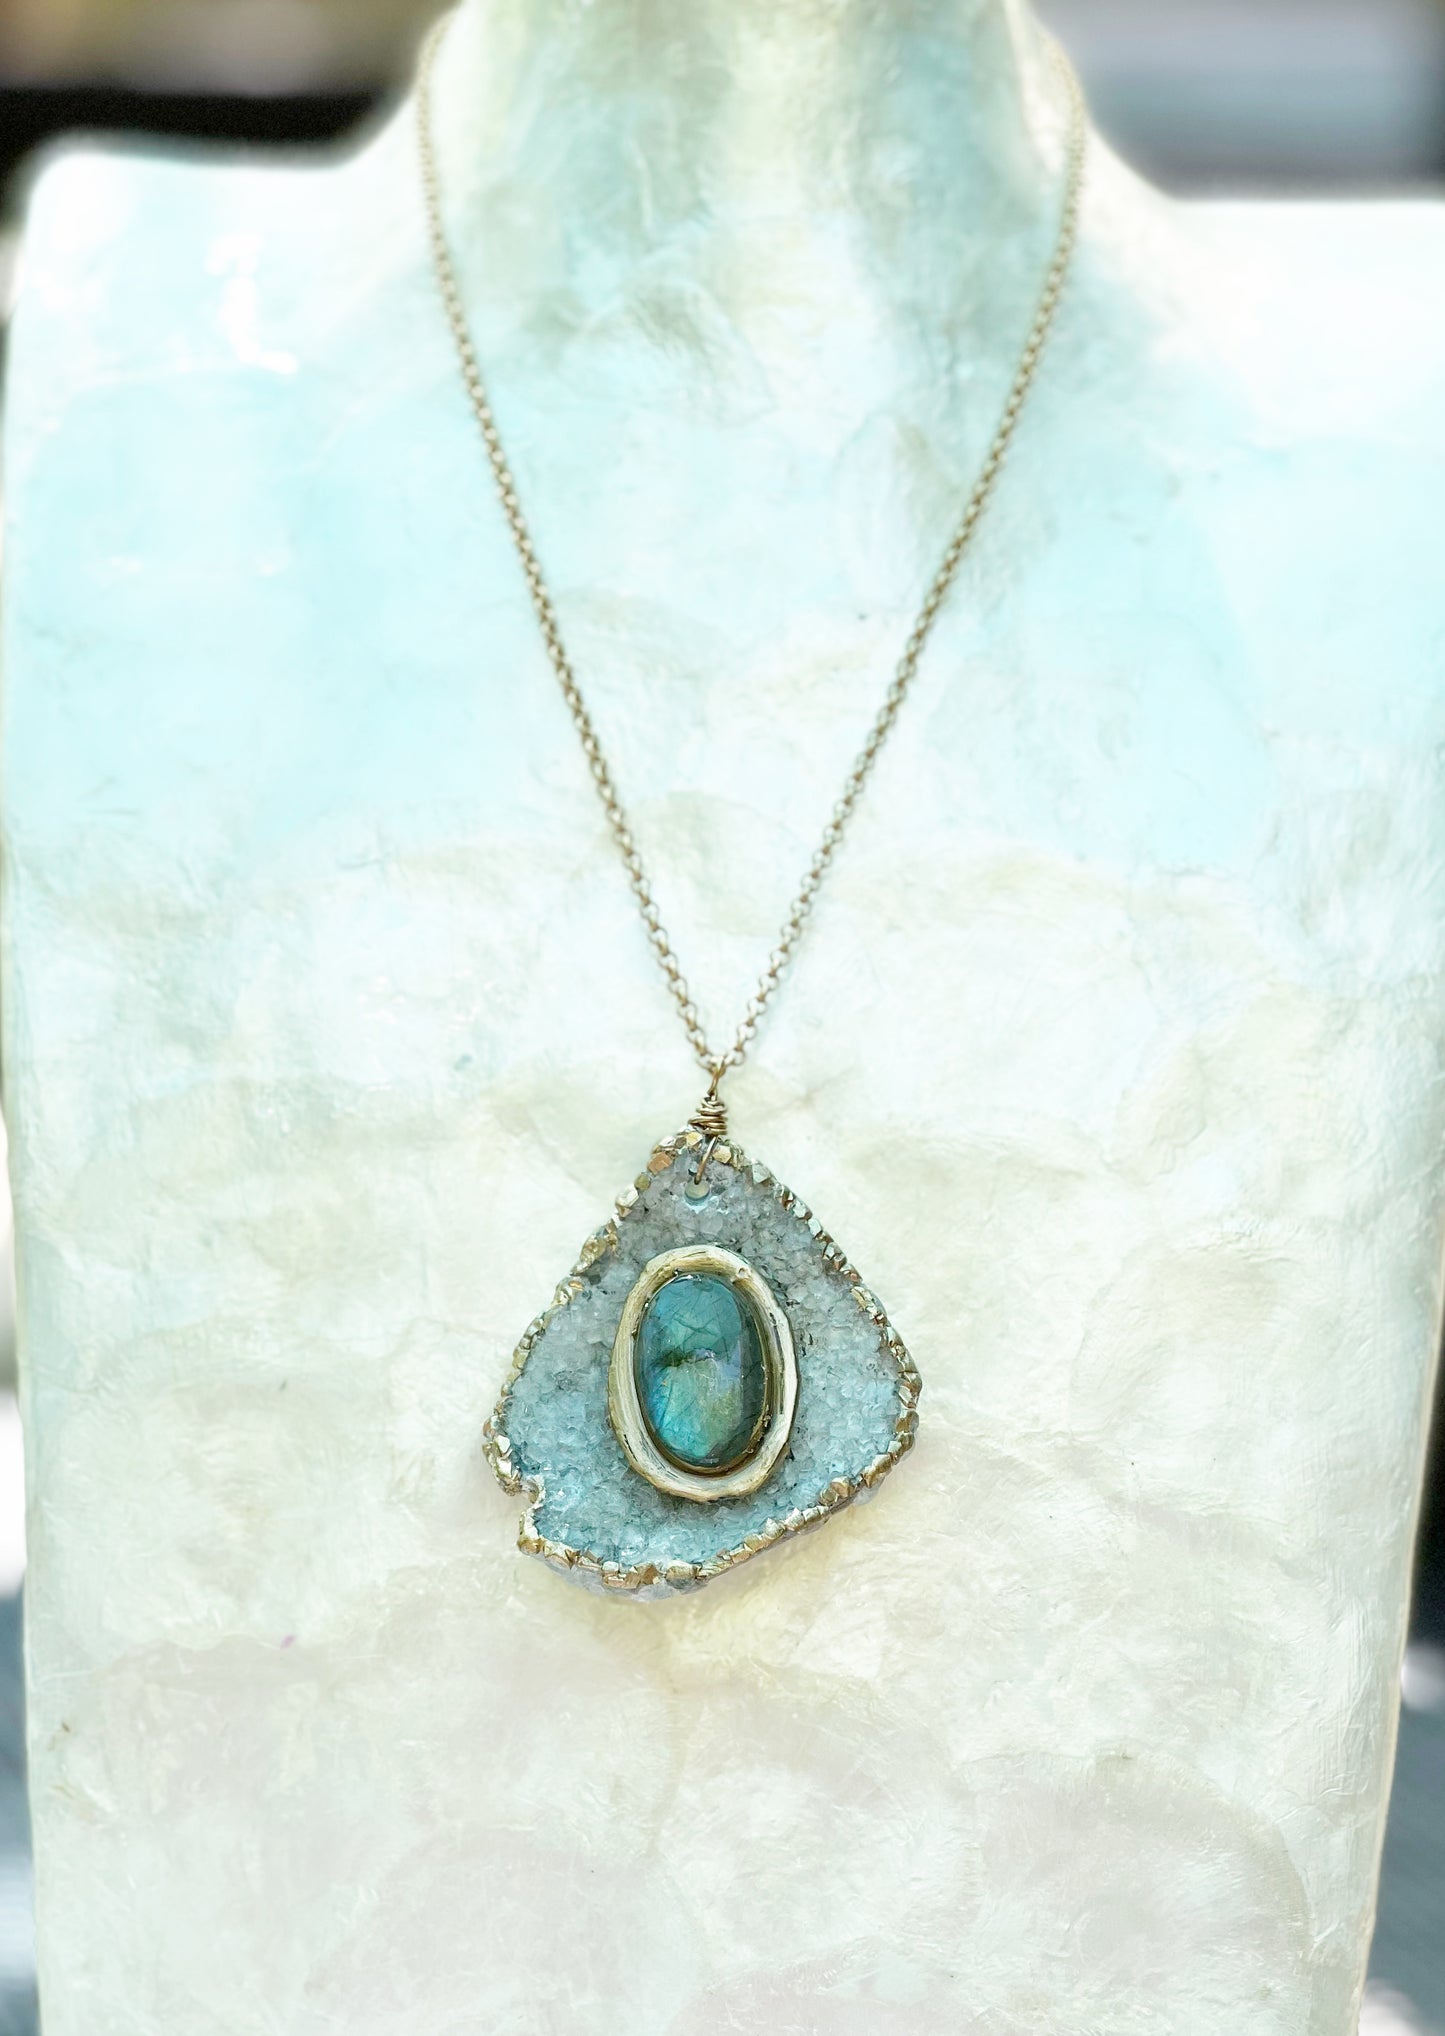 Honoring the Light Within Necklace / Labradorite